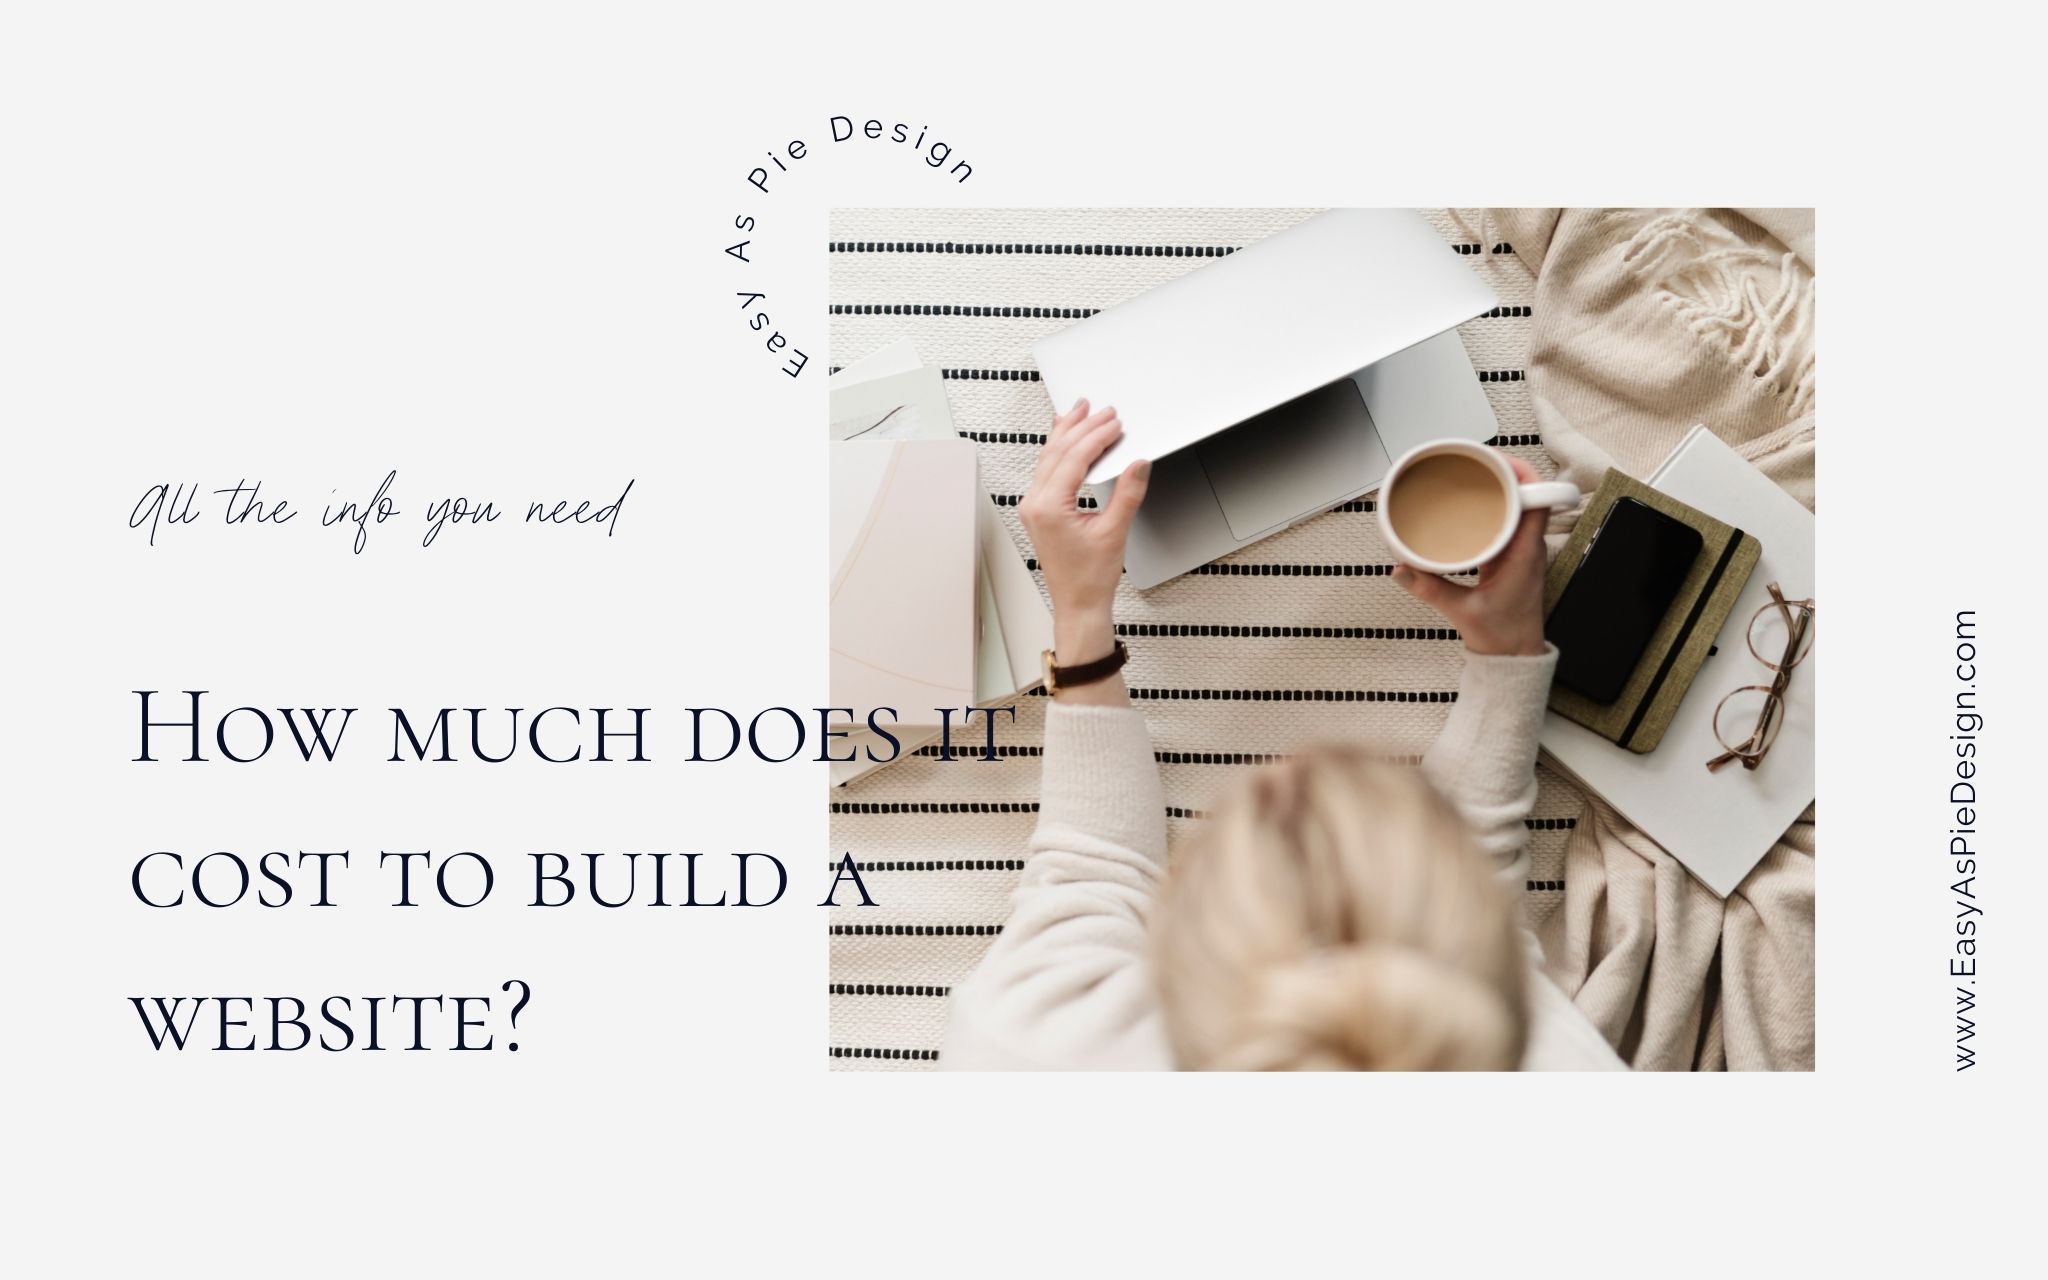 How Much Does It Cost To Build A Website